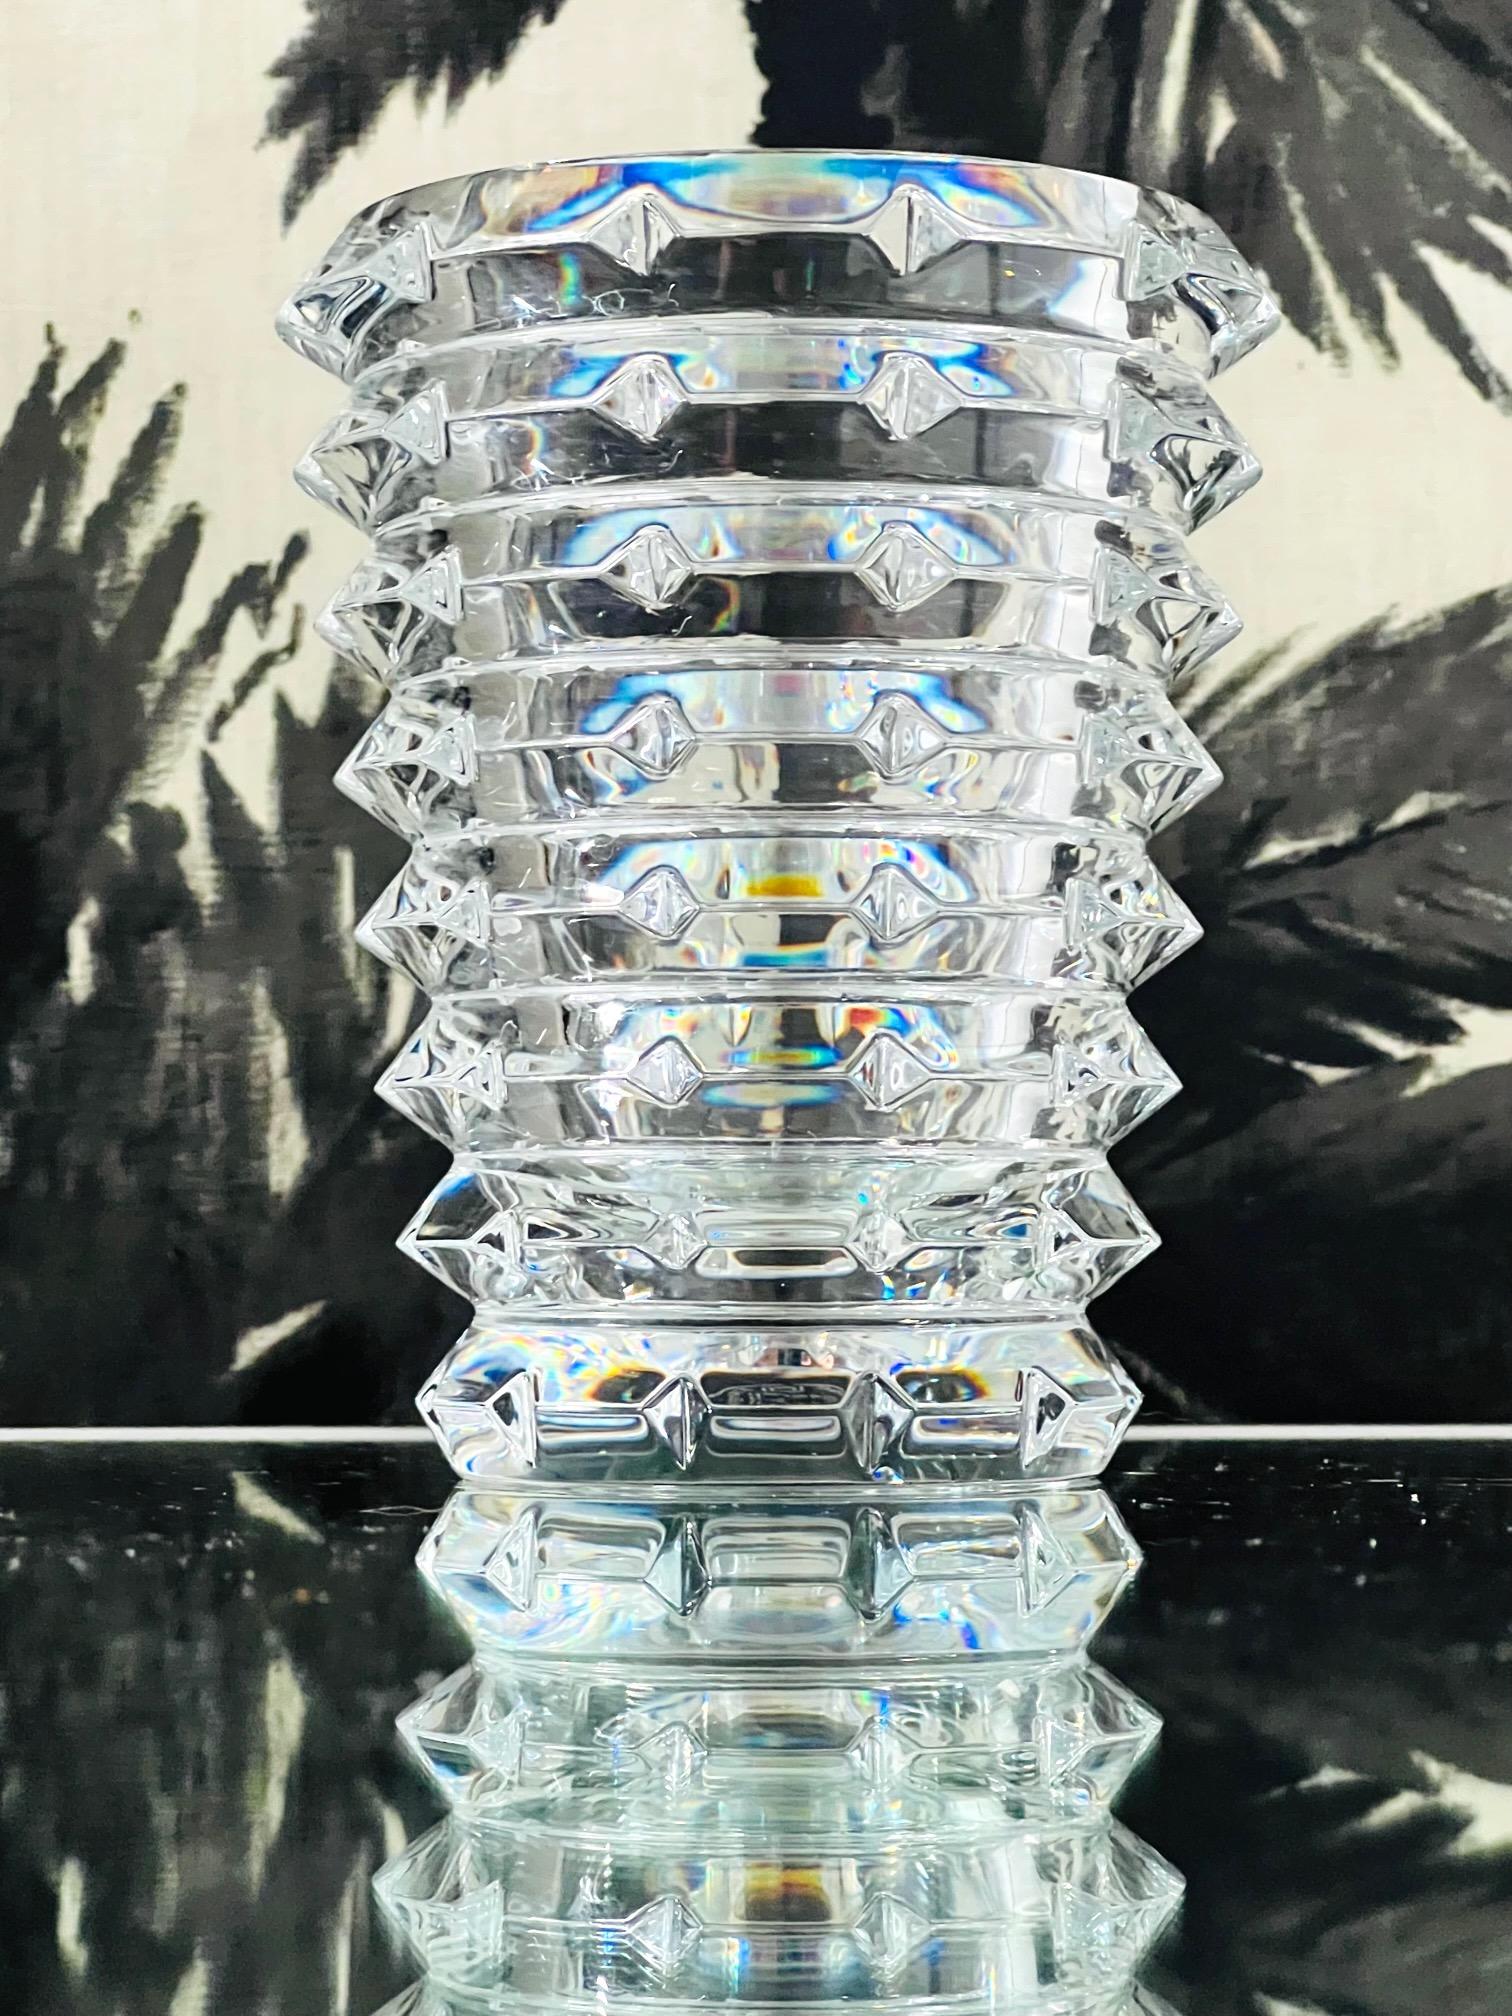 Late 20th Century Vintage Baccarat Vase with Geometric Crystal Prisms, France, c. 1975